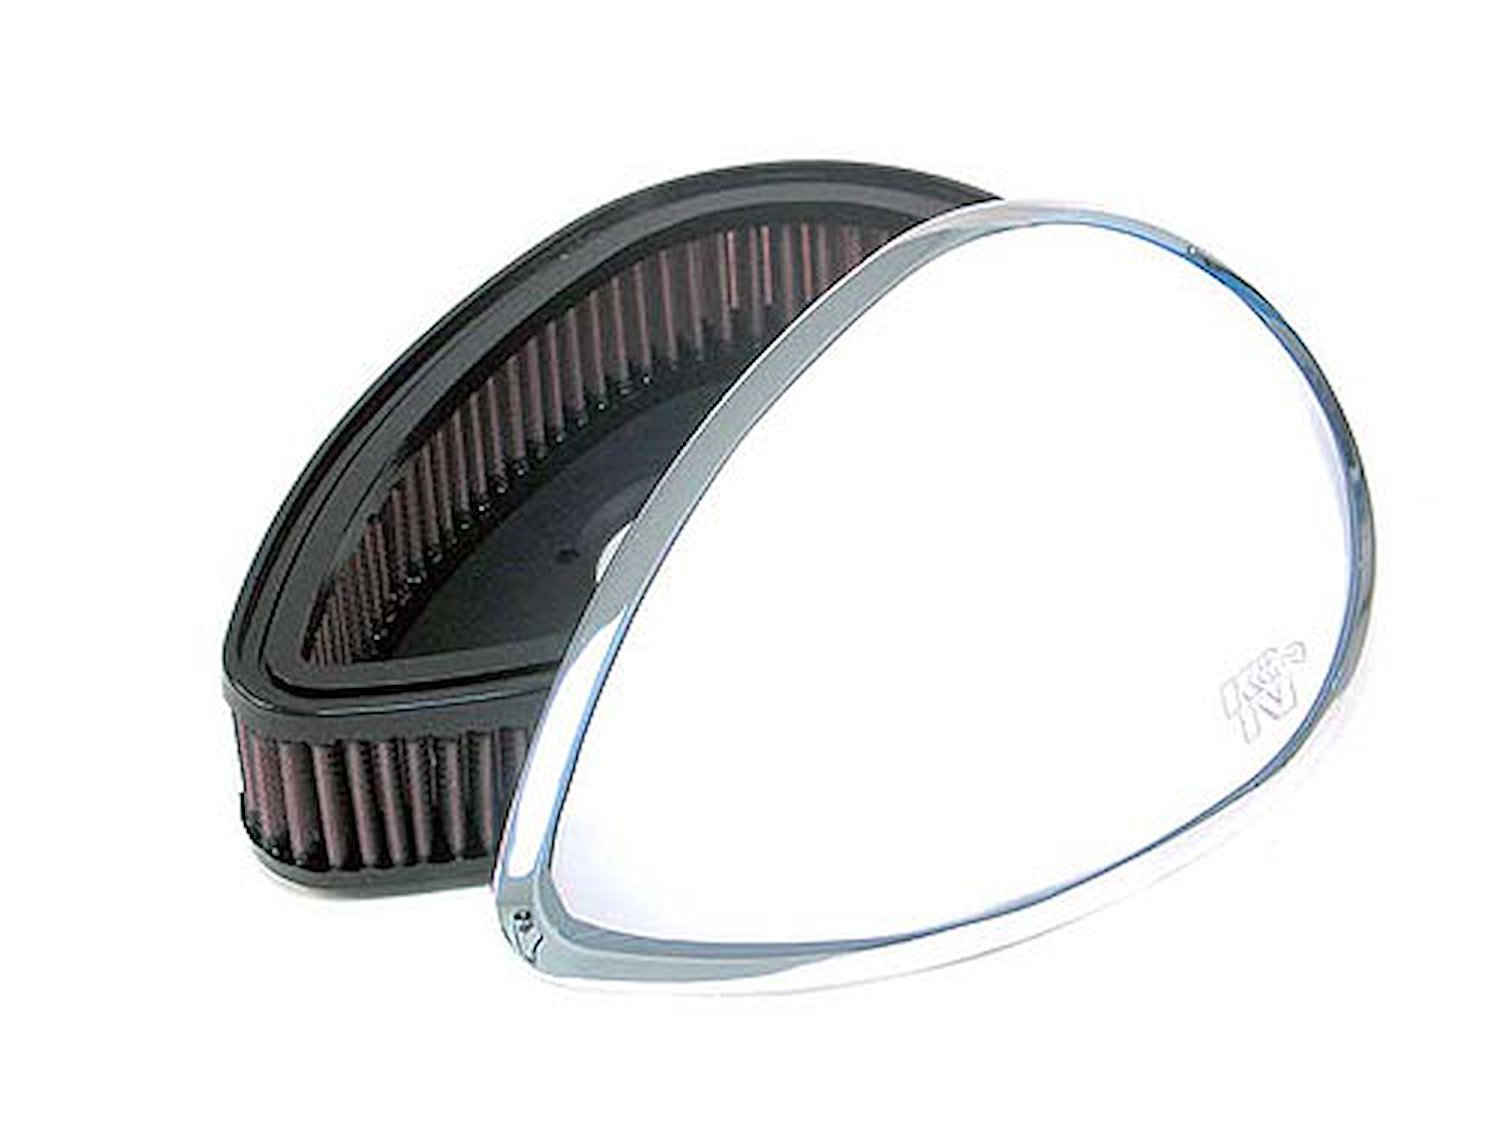 High-Performance Replacement Air Filter 1992-1997 Harley Davidson Electra/Softail/Fat Boy/Glide/Low Rider/Springer/Dyna